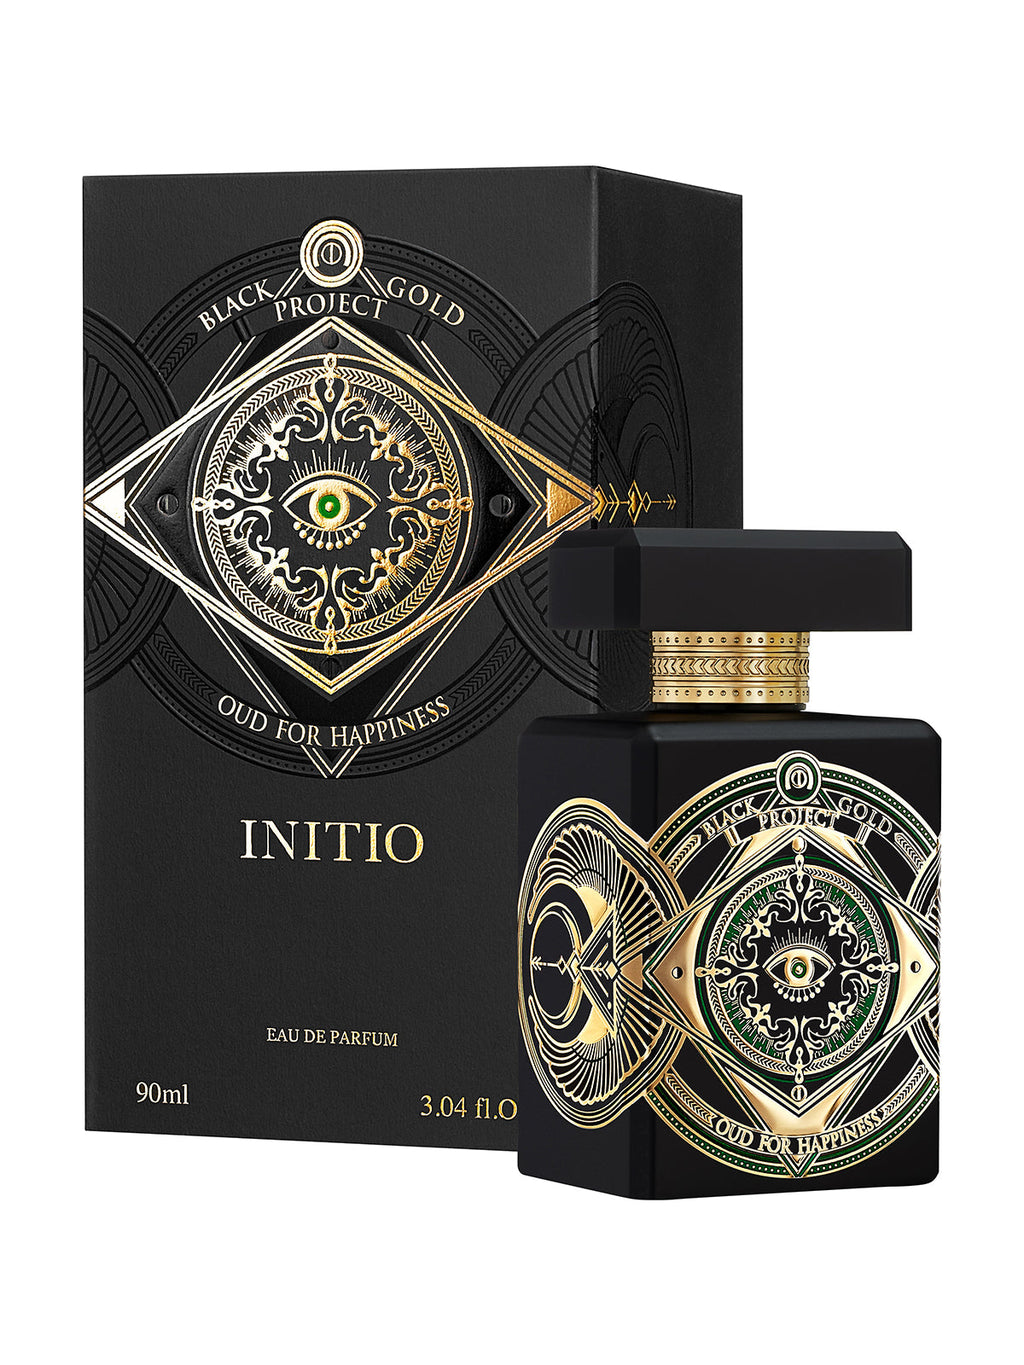 Initio Oud for Happiness 90ml EDP Spray for Unisex by Initio